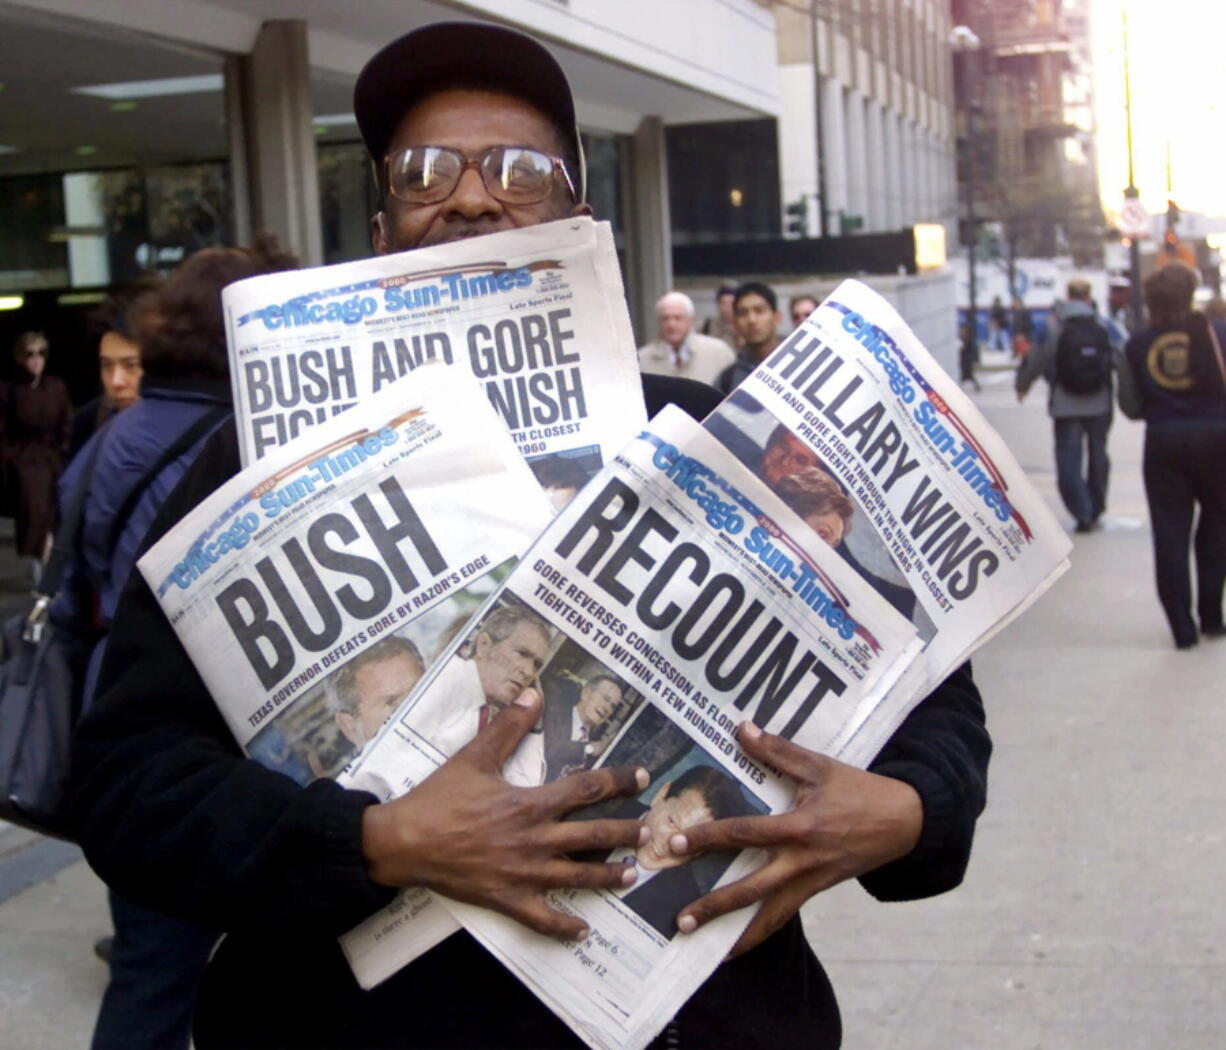 Willie Smith holds four copies of the Chicago Sun-Times, each with a different headline Nov. 8, 2000, in Chicago, reflecting a night of suspense, drama and changes in following the presidential race between Vice President Al Gore and Texas Gov. George W. Bush. What happens if America wakes up on Nov. 9 to a disputed presidential election in which the outcome turns on the results of a razor-thin margin in one or two states, one candidate seeks a recount and the other goes to court?